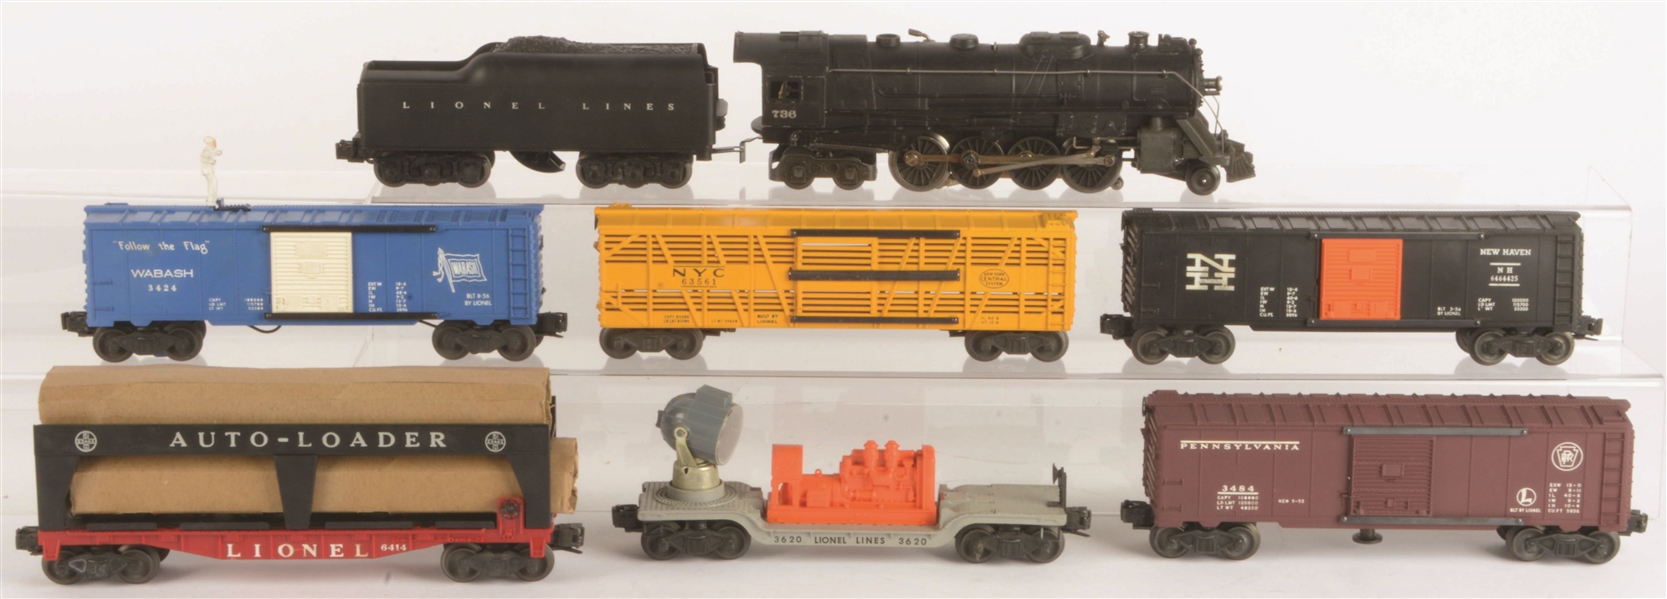 LOT OF 8: LIONEL NO.736 LOCOMOTIVE & TENDER WITH ASSORTED FREIGHT CARS.